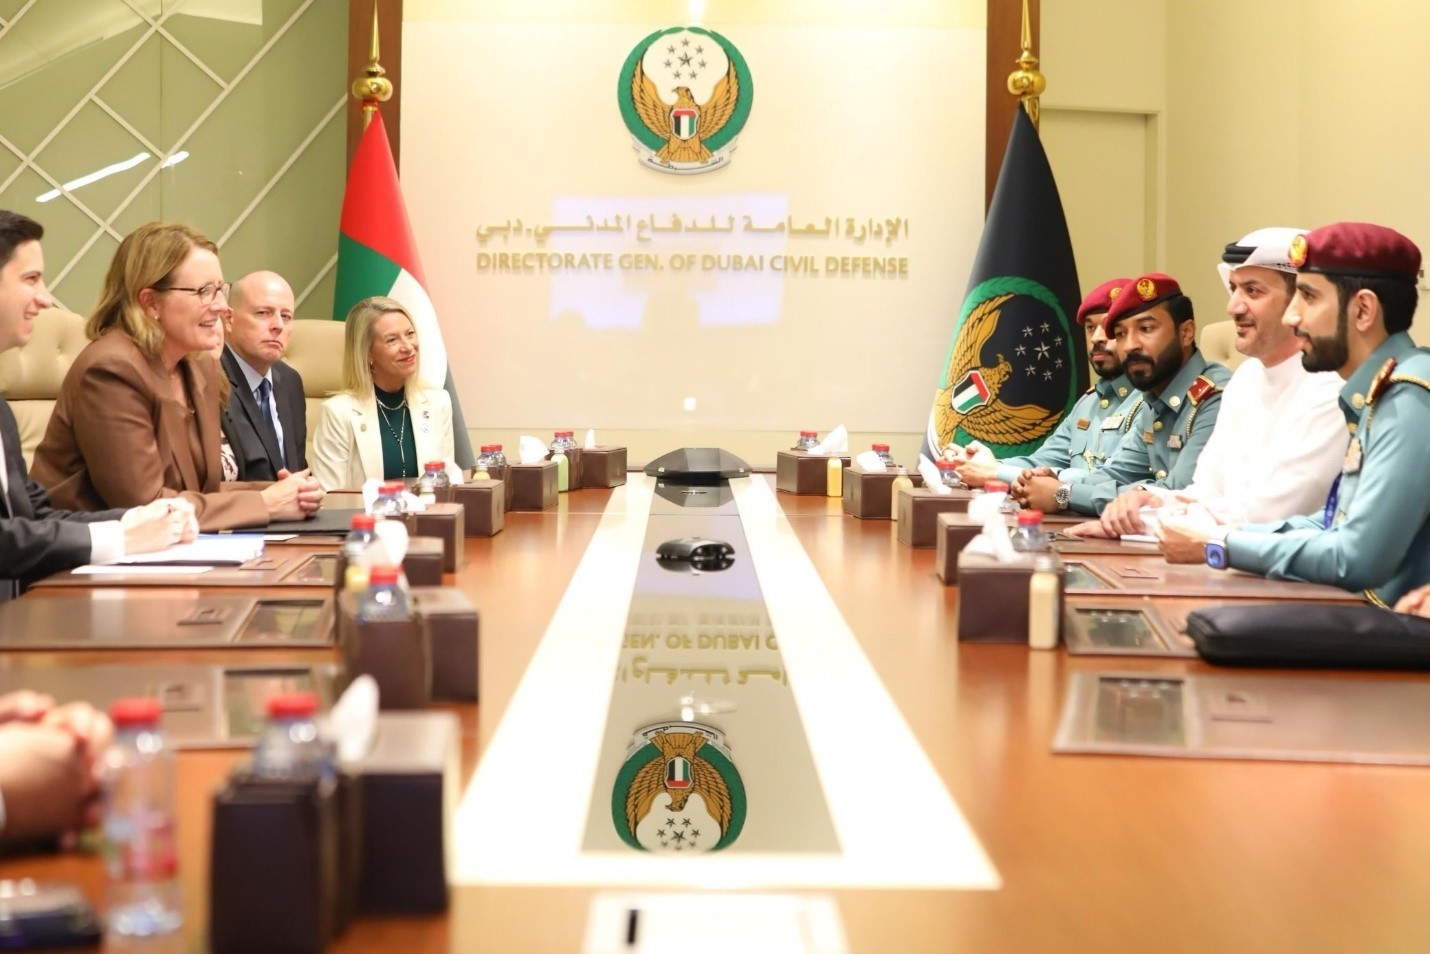 FEMA Administrator Deanne Criswell (middle left) and Deputy Director of Dubai Civil Defense and Deputy Commander of UAE Civil Defense His Excellency Major General Jamal bin Aded Al Muhairi (middle right) met with staff to discuss disaster resilience and shared COP28 goals. (UAE Civil Defense Photo)